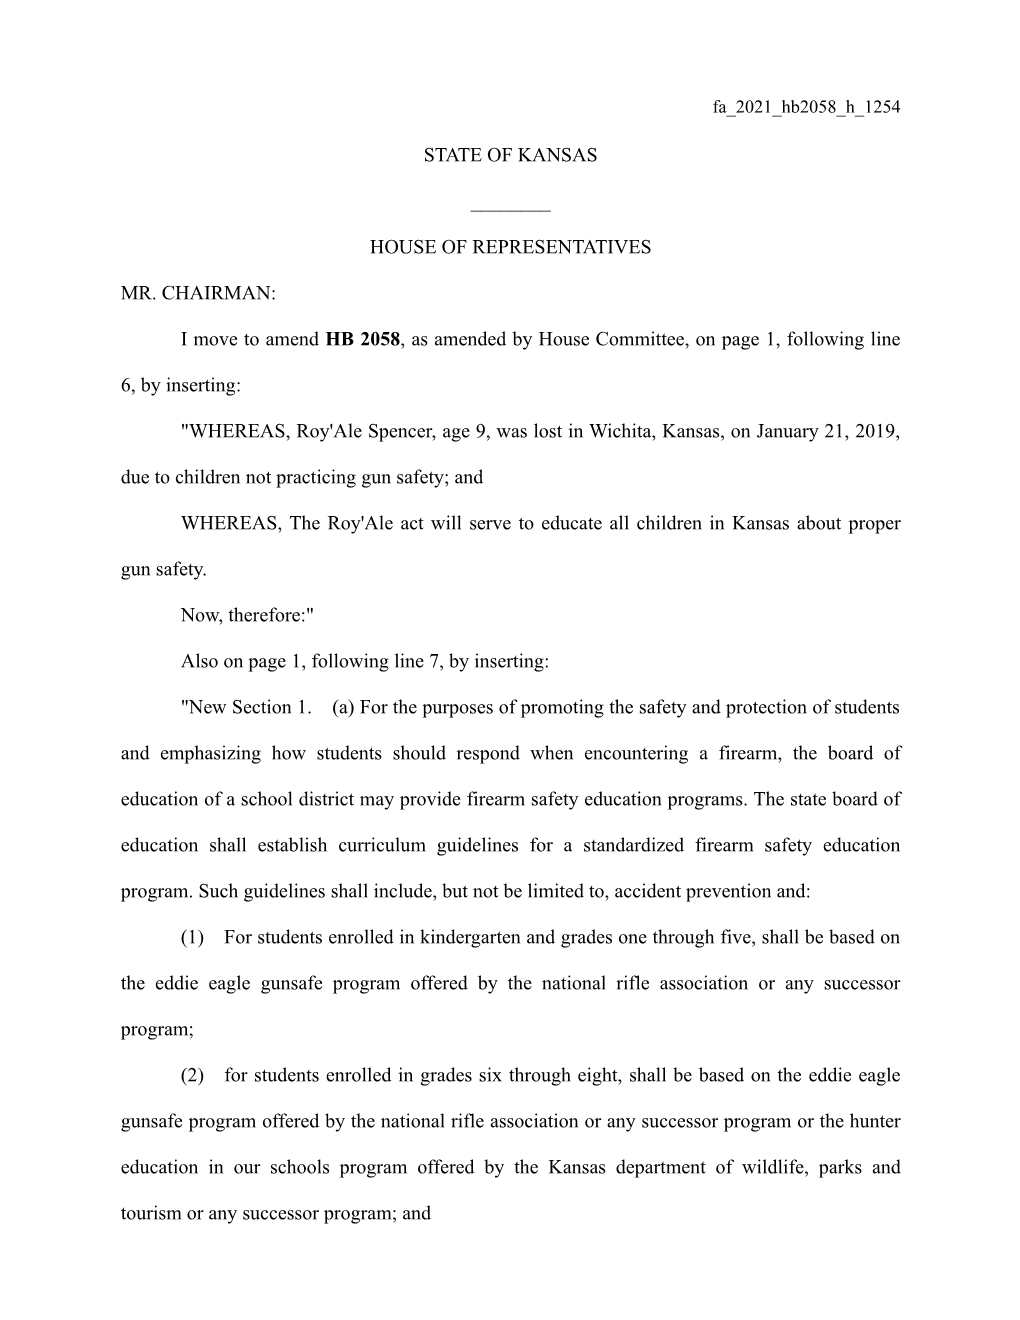 I Move to Amend HB 2058, As Amended by House Committee, on Page 1, Following Line